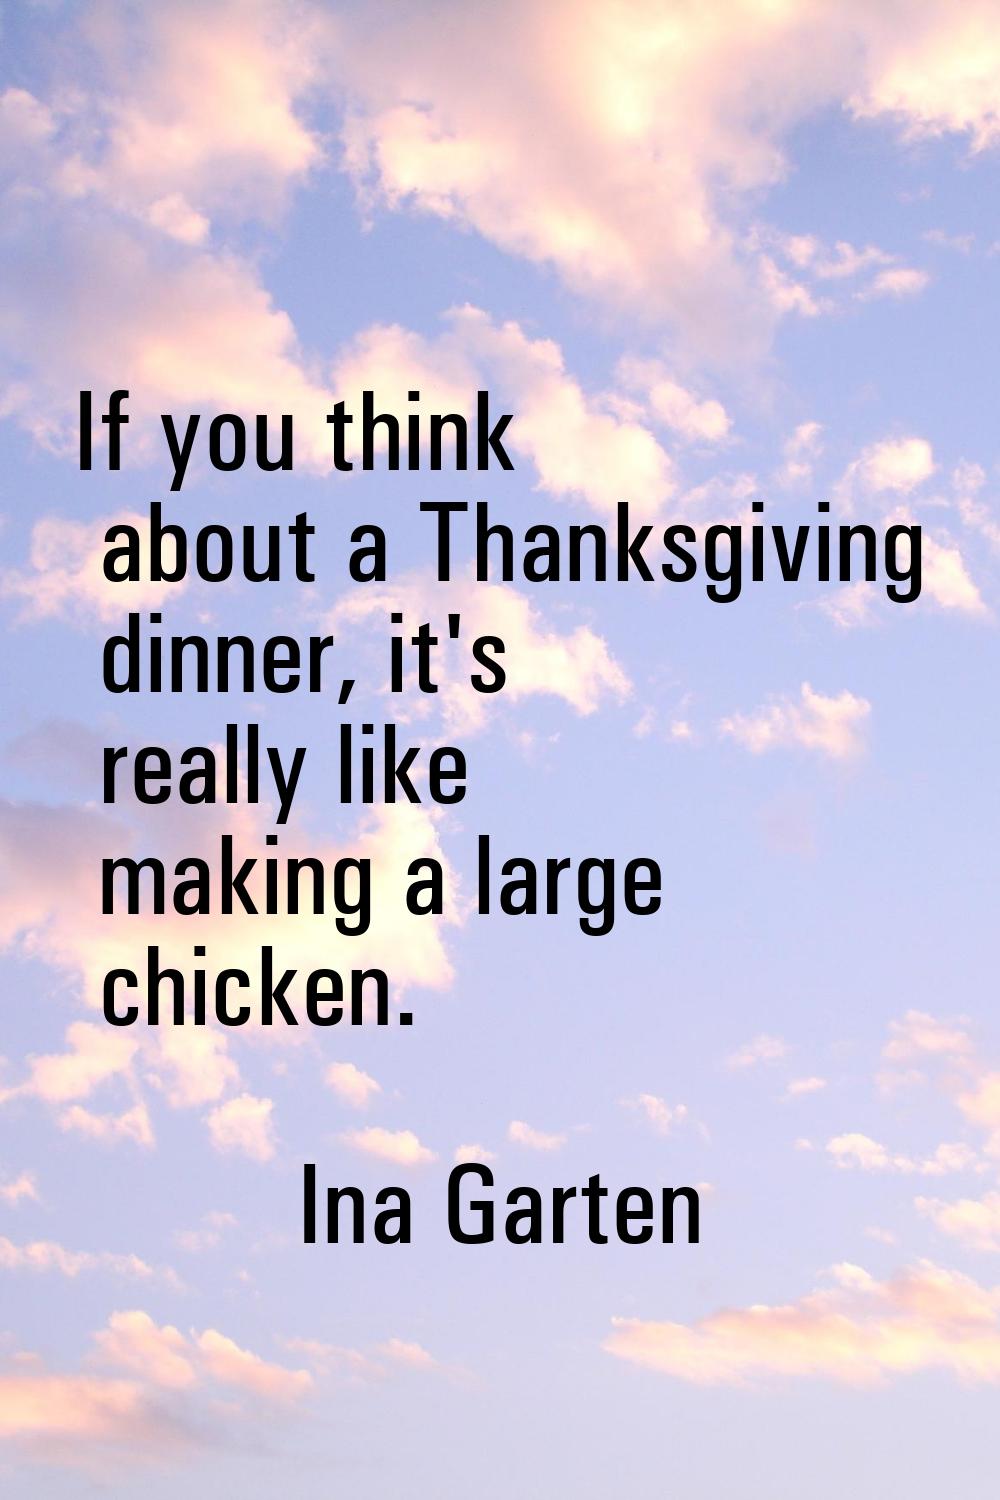 If you think about a Thanksgiving dinner, it's really like making a large chicken.